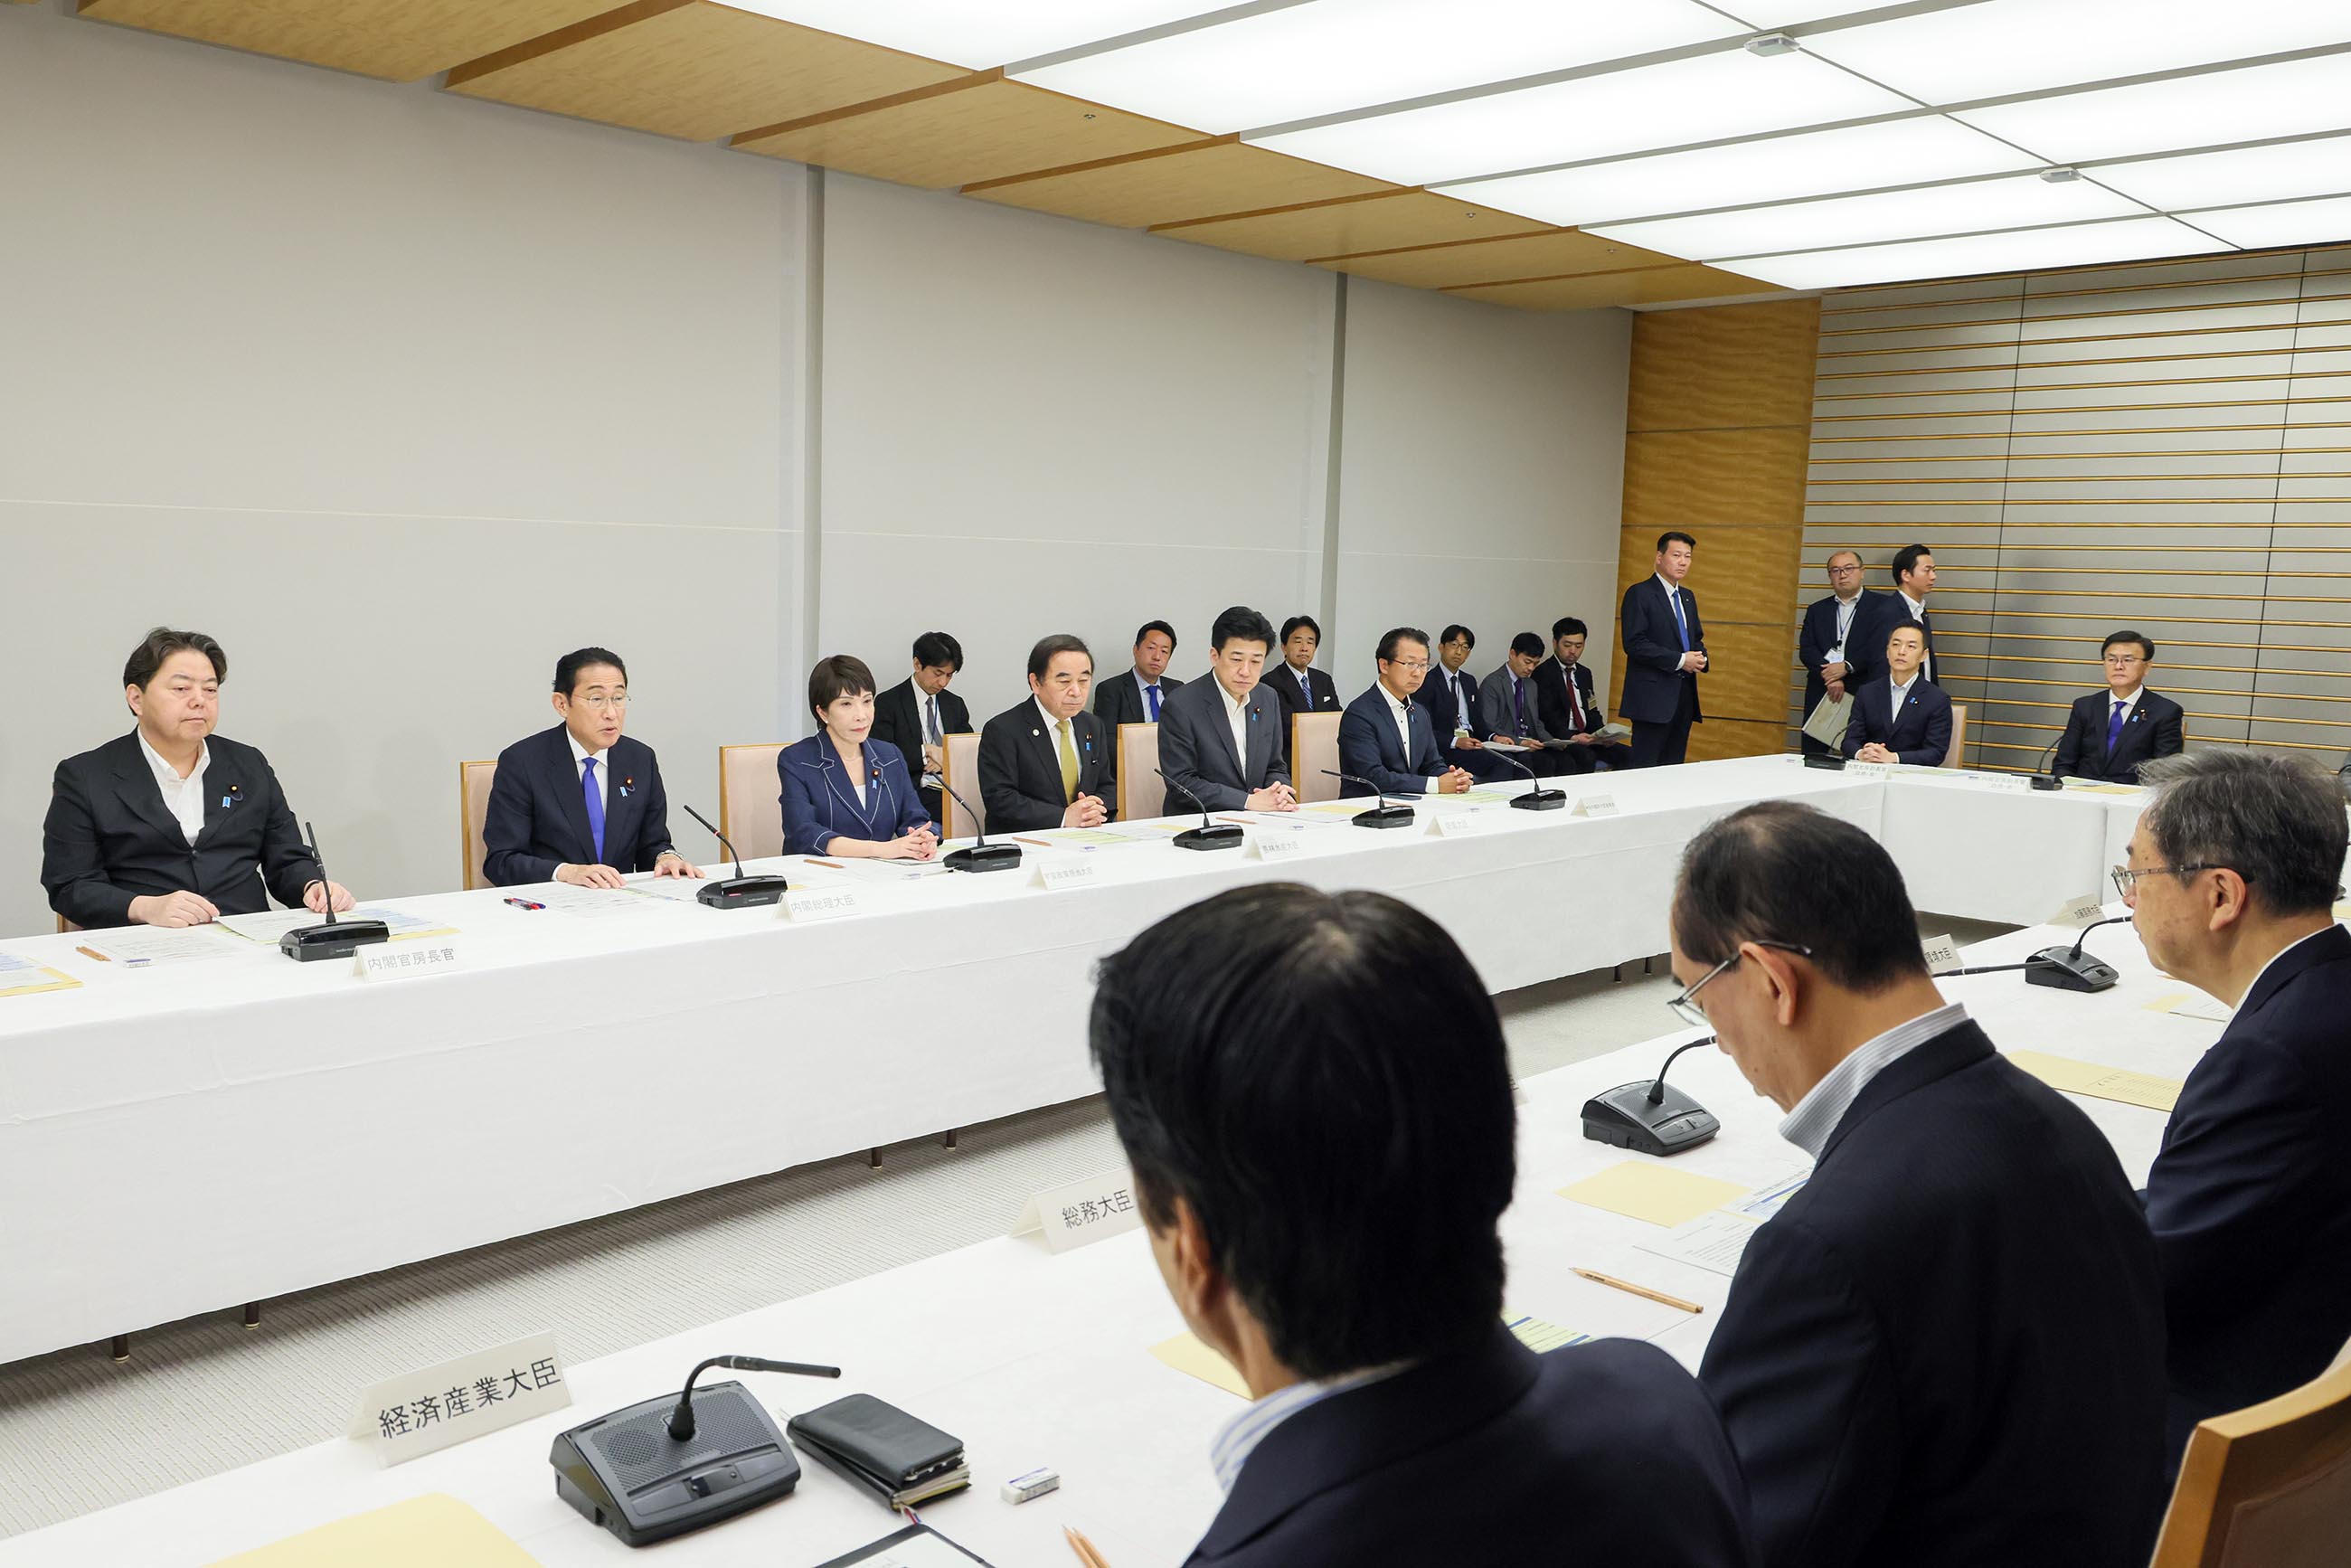 Prime Minister wrapping up a meeting (5)